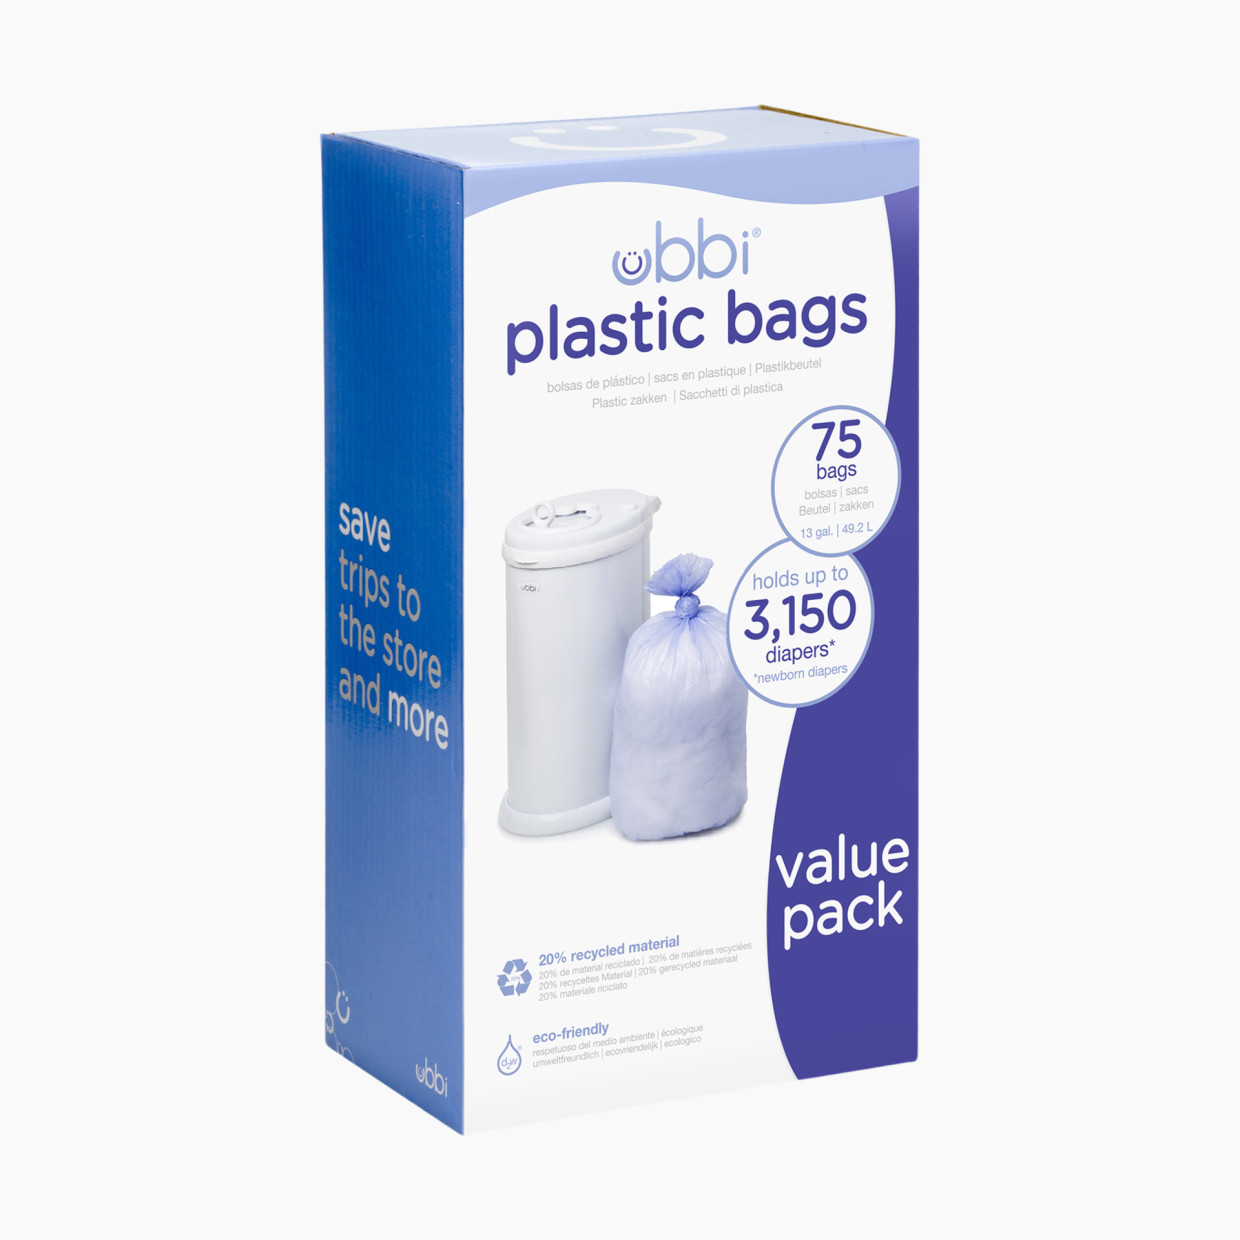 Clear 2 Gallon Trash Bag (200 Pack) Un-Scented Small Garbage Bags for  Bathroom C